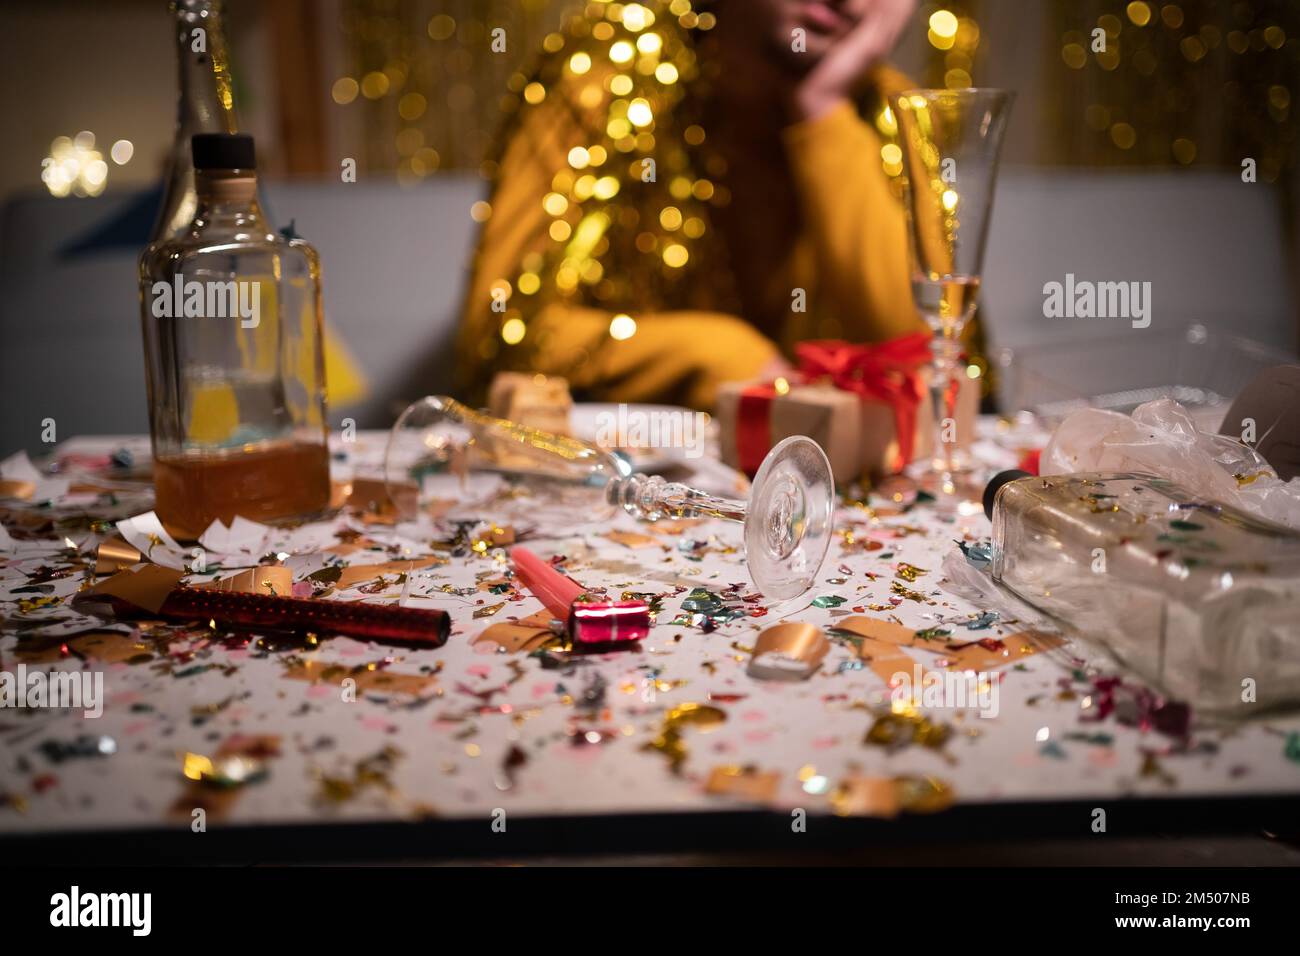 Messy table after party and sitting blurred man in background. Copy space Stock Photo